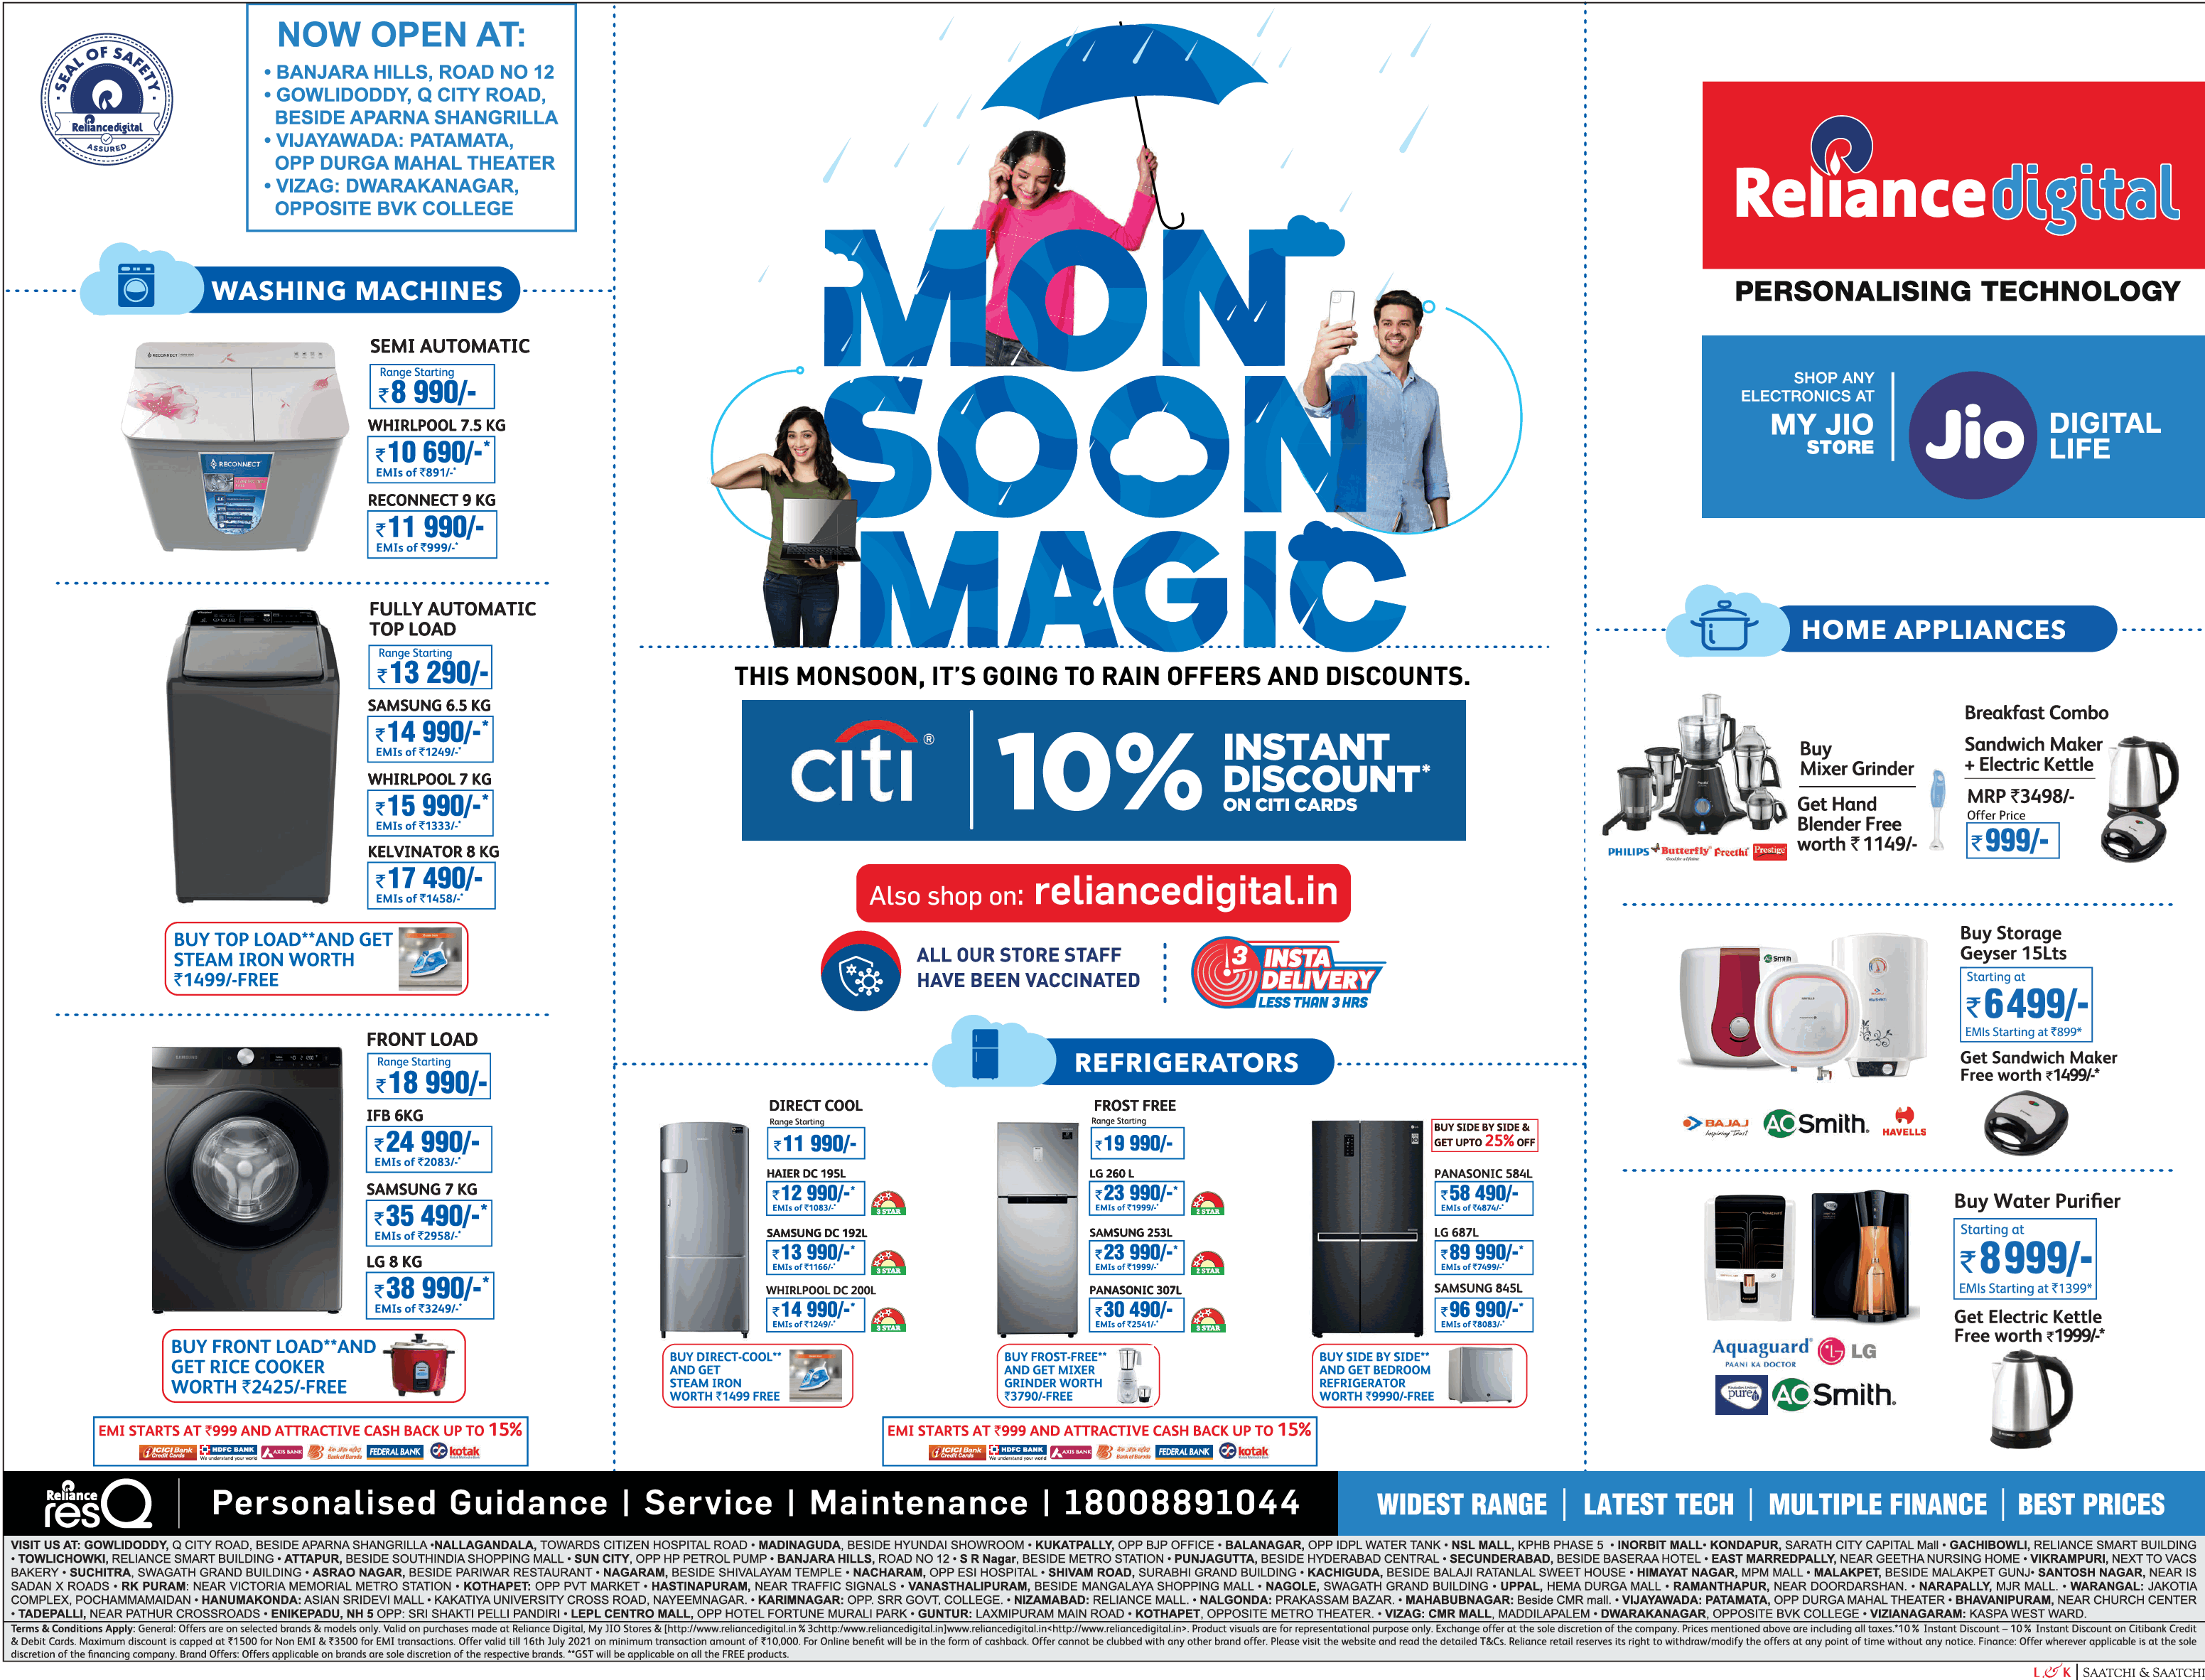 reliance-digital-monsoon-magic-offers-and-discounts-july-2021-ad-times-of-india-hyderabad-10-7-2021